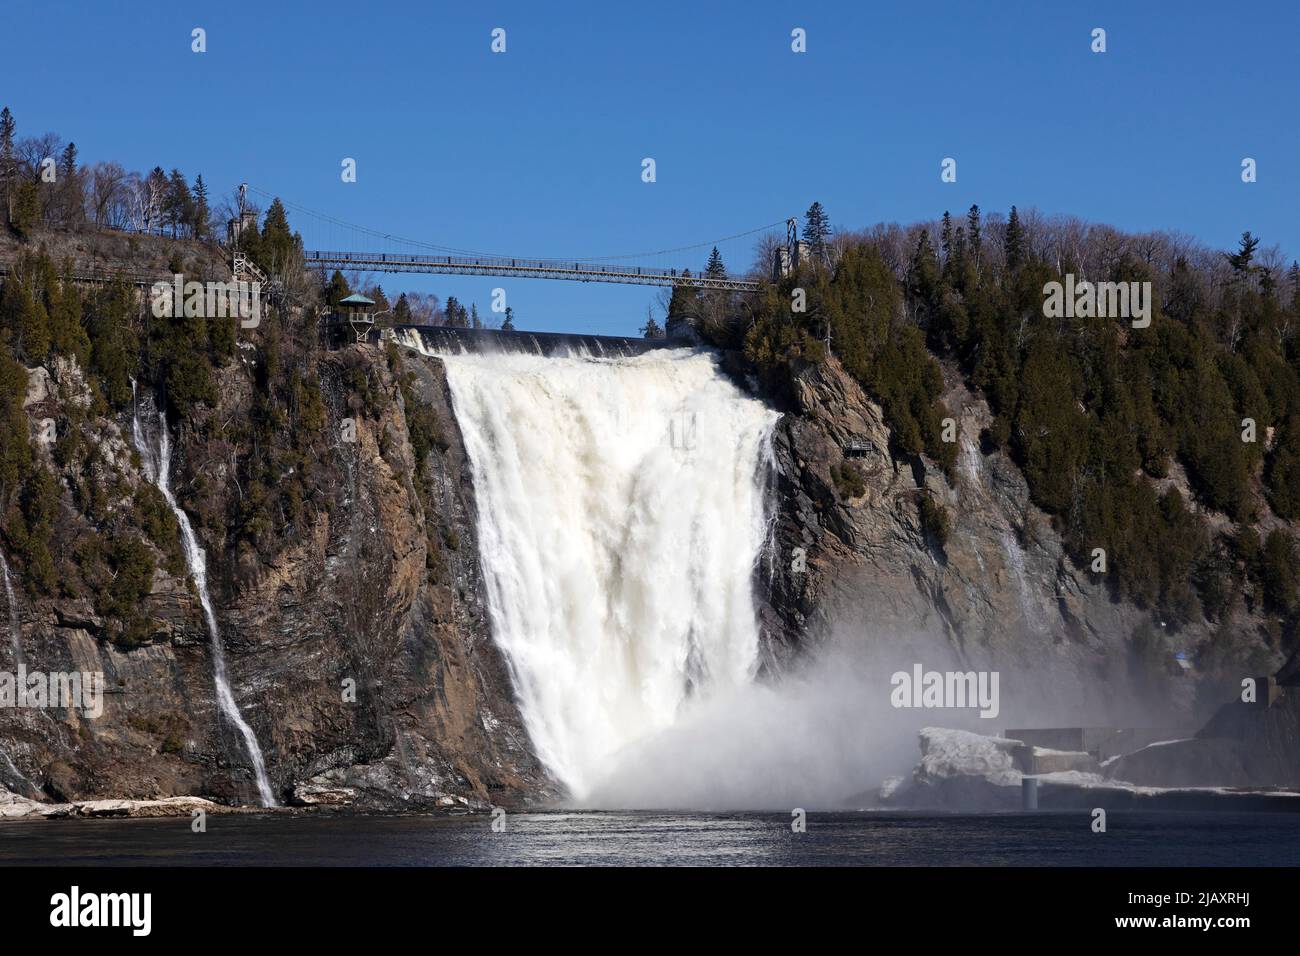 Montmorency Falls (Chute Montmorency) near Quebec City in Canada. The 83-metre-high waterfall is in Montmorency Falls Park. Stock Photo